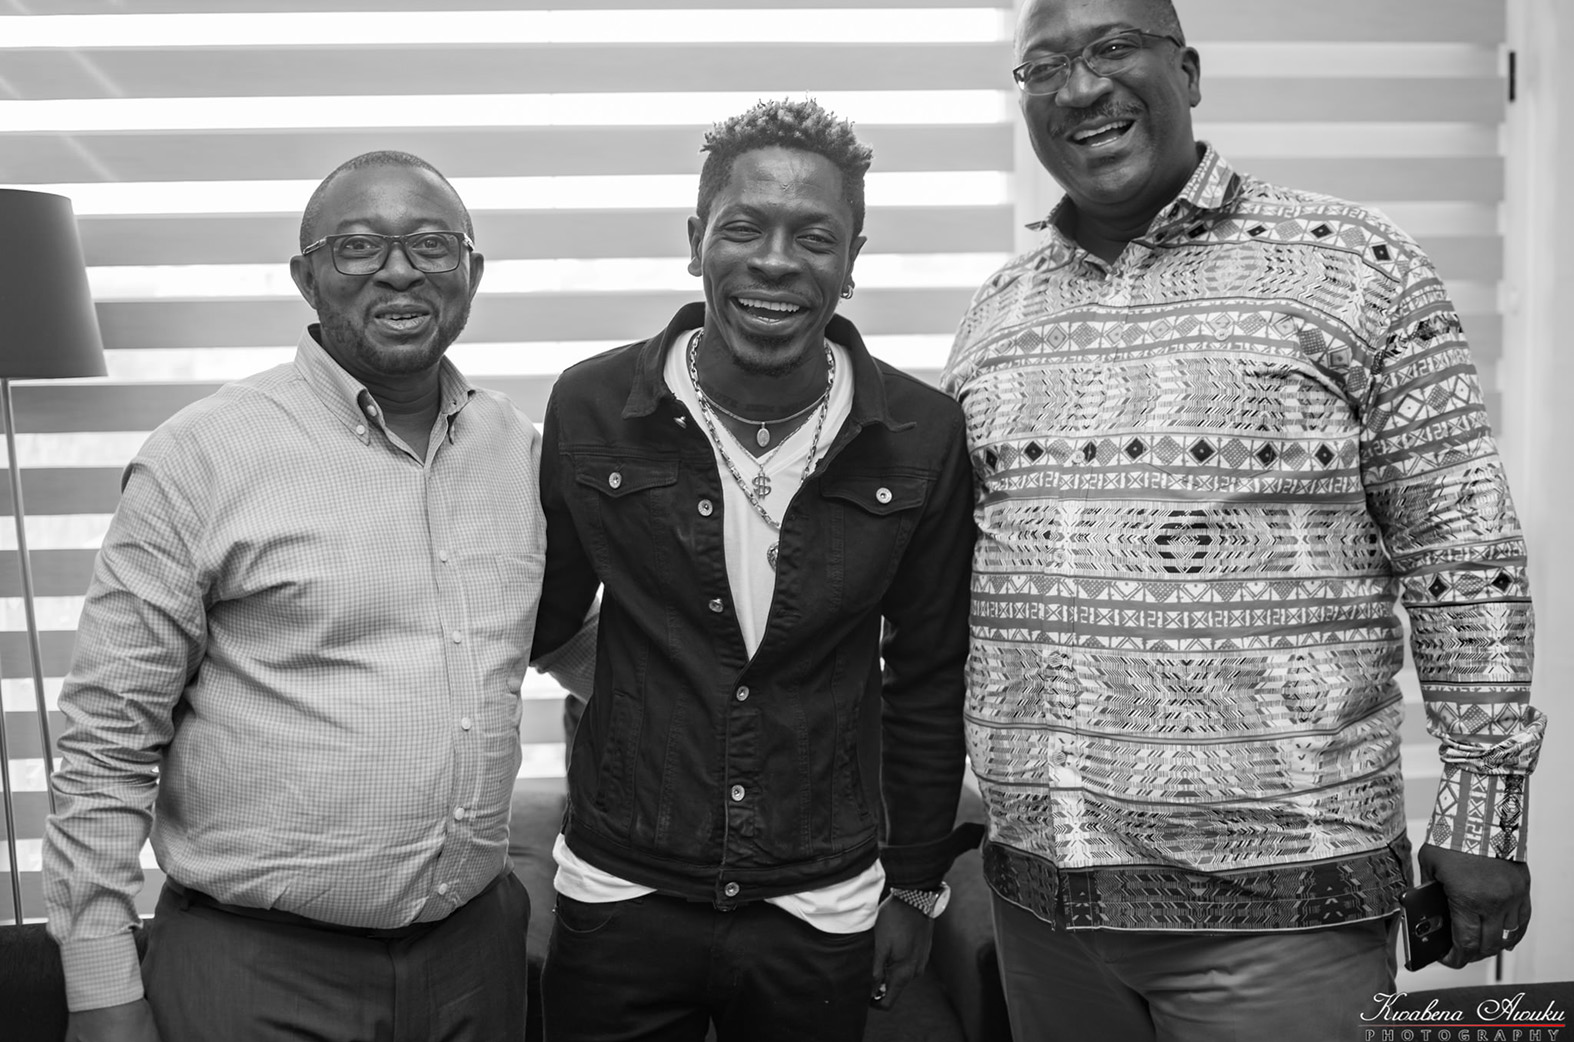 Shatta Wale liaises with key stakeholders to empower youth